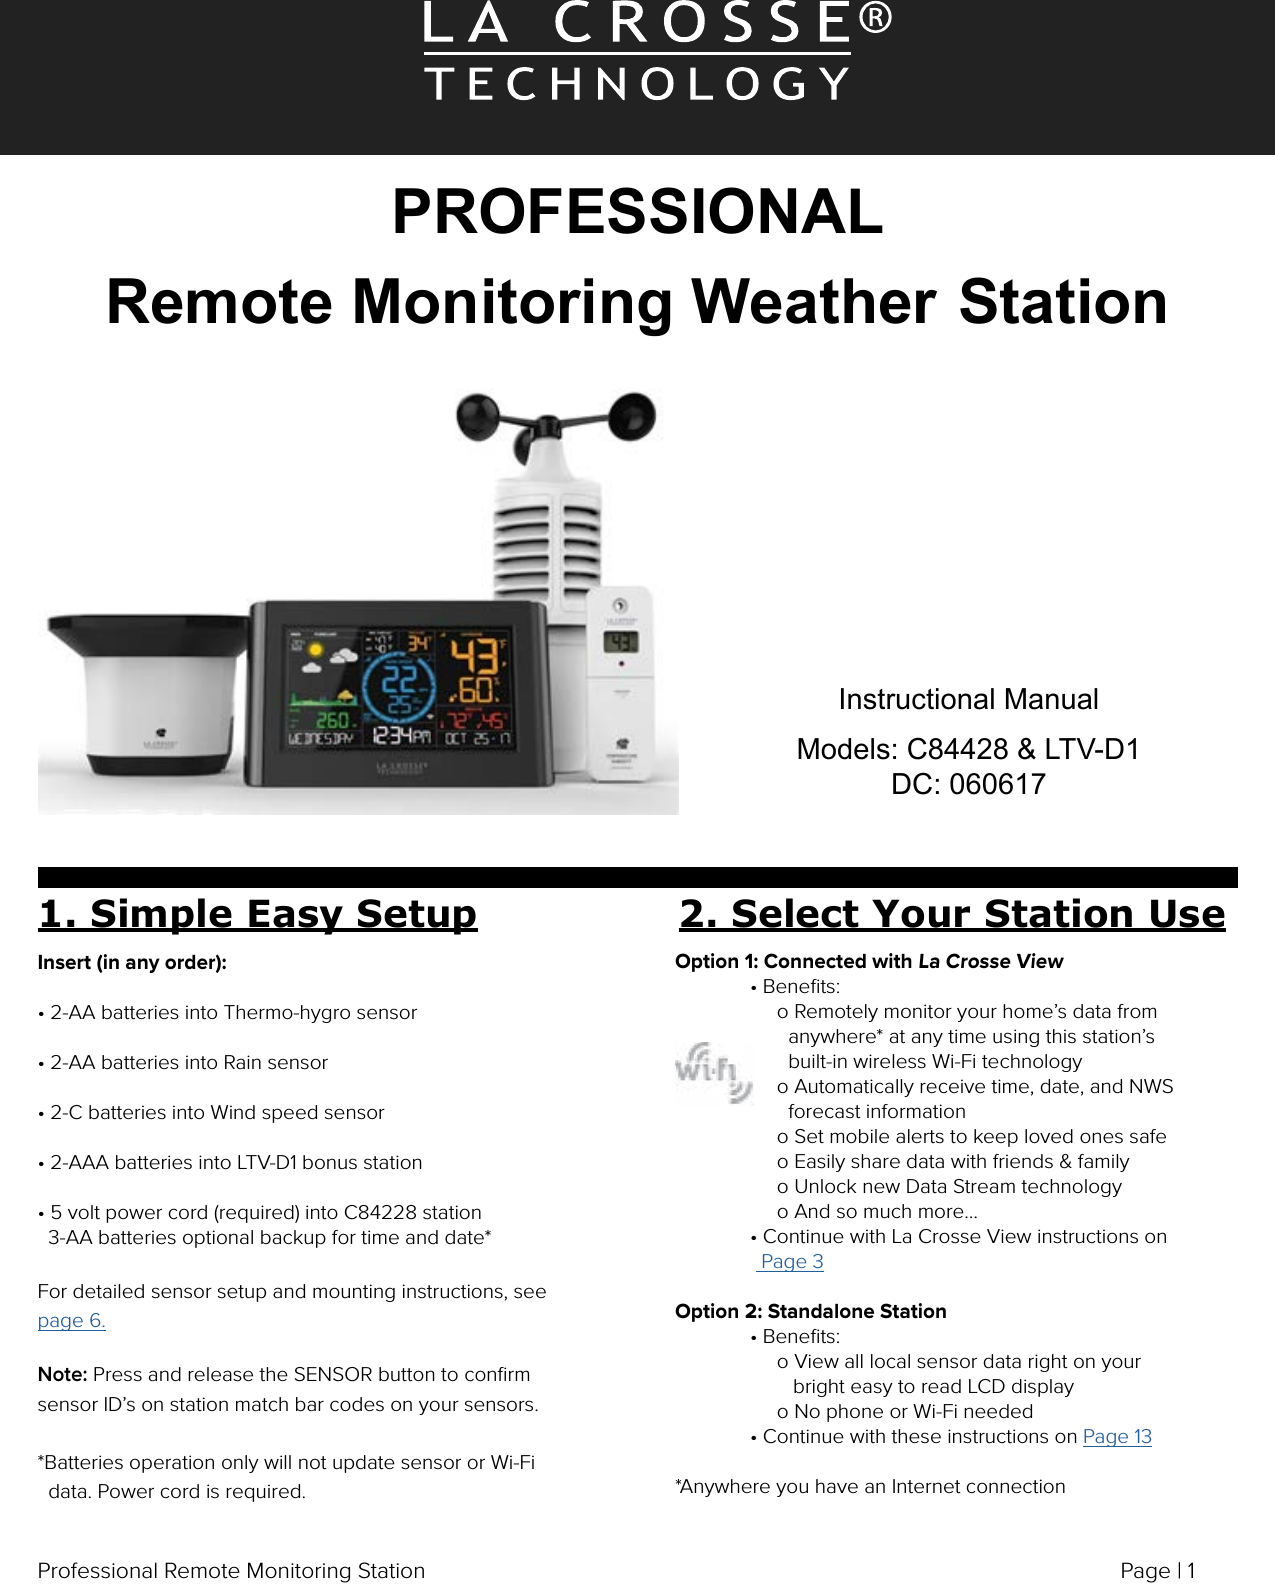 Page | 1Professional Remote Monitoring StationPROFESSIONAL Remote Monitoring Weather StationInstructional ManualModels: C84428 &amp; LTV-D1DC: 0606171. Simple Easy Setup 2. Select Your Station UseInsert (in any order):• 2-AA batteries into Thermo-hygro sensor• 2-AA batteries into Rain sensor• 2-C batteries into Wind speed sensor• 2-AAA batteries into LTV-D1 bonus station• 5 volt power cord (required) into C84228 station   3-AA batteries optional backup for time and date*                       For detailed sensor setup and mounting instructions, see page 6.Note: Press and release the SENSOR button to conﬁrm sensor ID’s on station match bar codes on your sensors.*Batteries operation only will not update sensor or Wi-Fi   data. Power cord is required.Option 1: Connected with La Crosse View  • Beneﬁts:       o Remotely monitor your home’s data from                      anywhere* at any time using this station’s                      built-in wireless Wi-Fi technology       o Automatically receive time, date, and NWS                      forecast information       o Set mobile alerts to keep loved ones safe        o Easily share data with friends &amp; family       o Unlock new Data Stream technology       o And so much more…  • Continue with La Crosse View instructions on                 Page 3Option 2: Standalone Station  • Beneﬁts:       o View all local sensor data right on your           bright easy to read LCD display         o No phone or Wi-Fi needed  • Continue with these instructions on Page 13*Anywhere you have an Internet connection